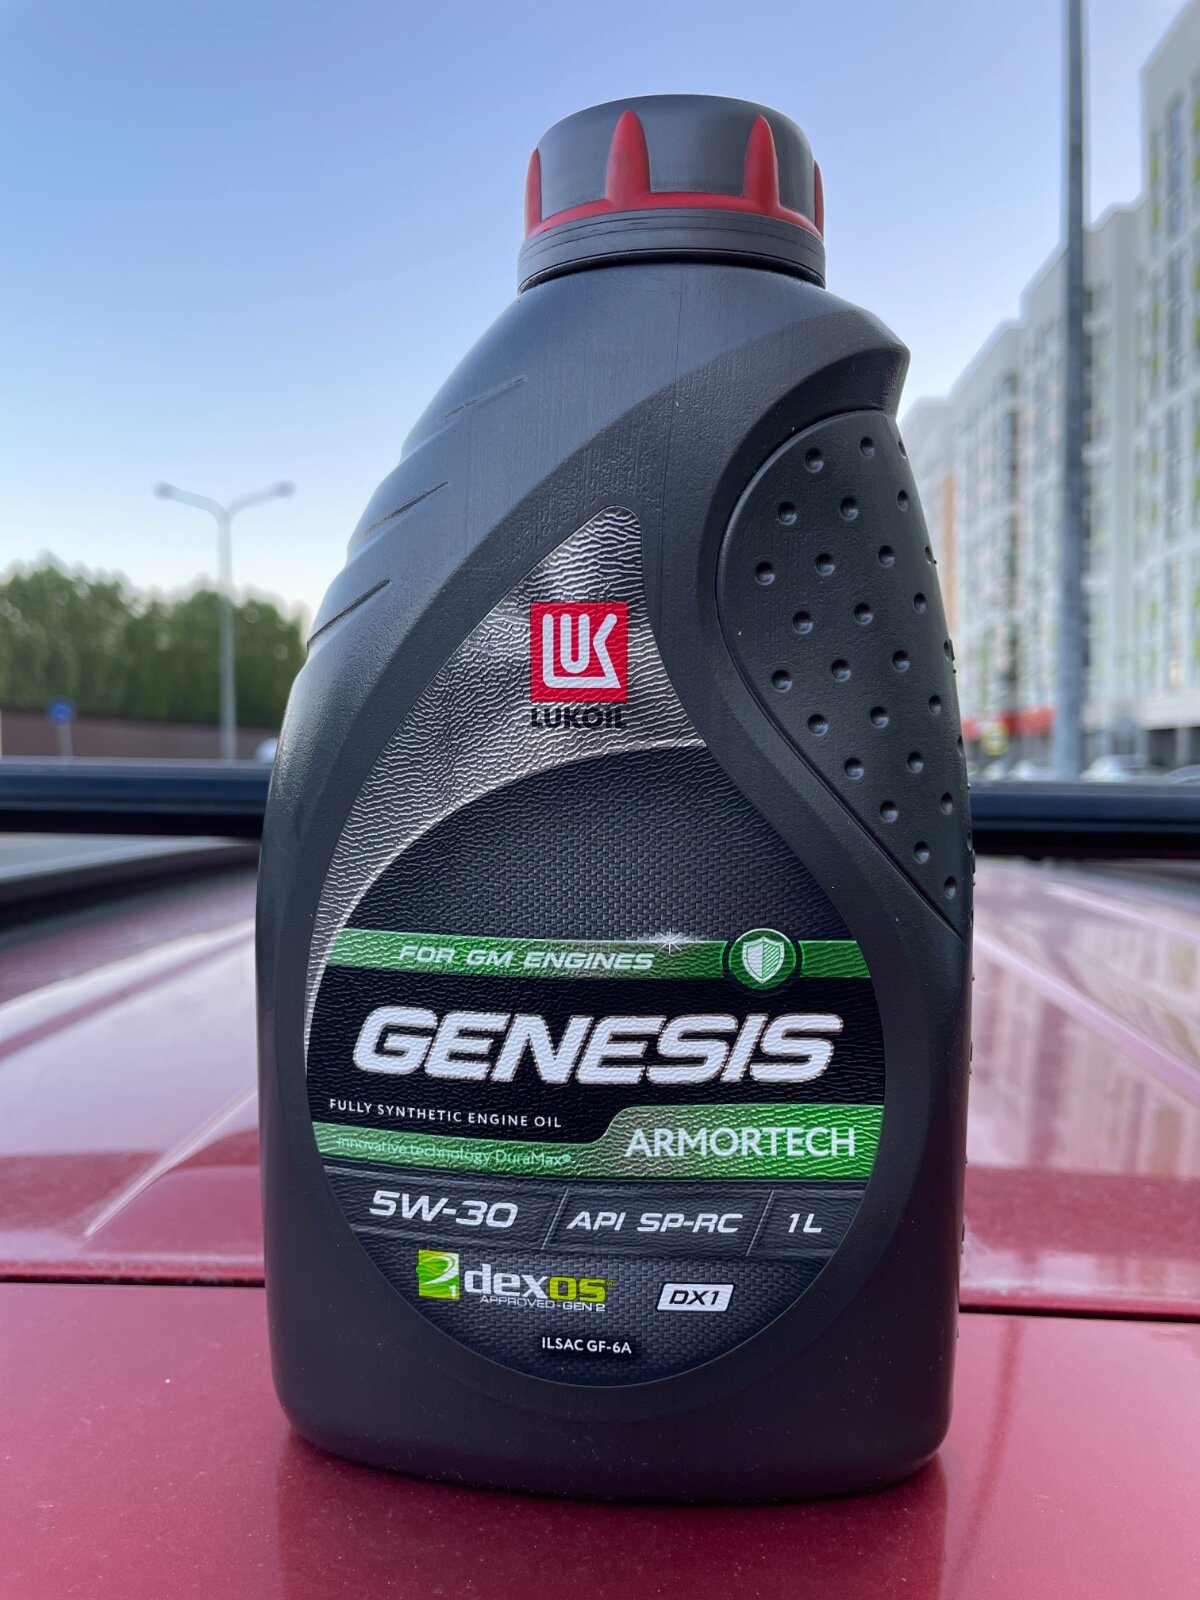 Масло лукойл dx1. Lukoil Genesis dx1 5w30. Genesis Armortech dx1 5w-30. Lukoil Genesis Armortech dx1 5w-30. Лукойл Genesis Armortech 5w-30.